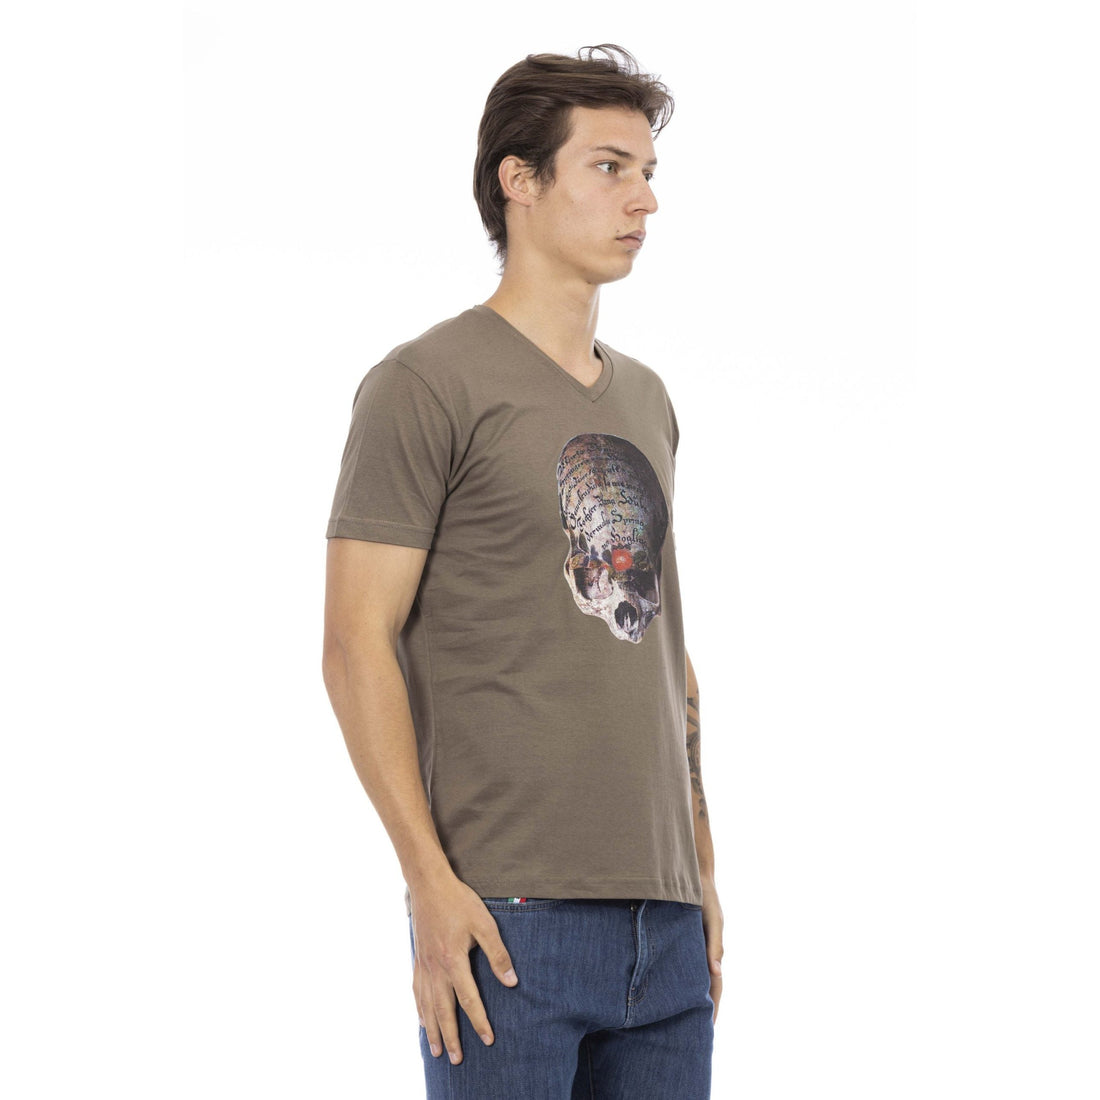 Trussardi Action Elevated Casual Brown V-Neck Tee